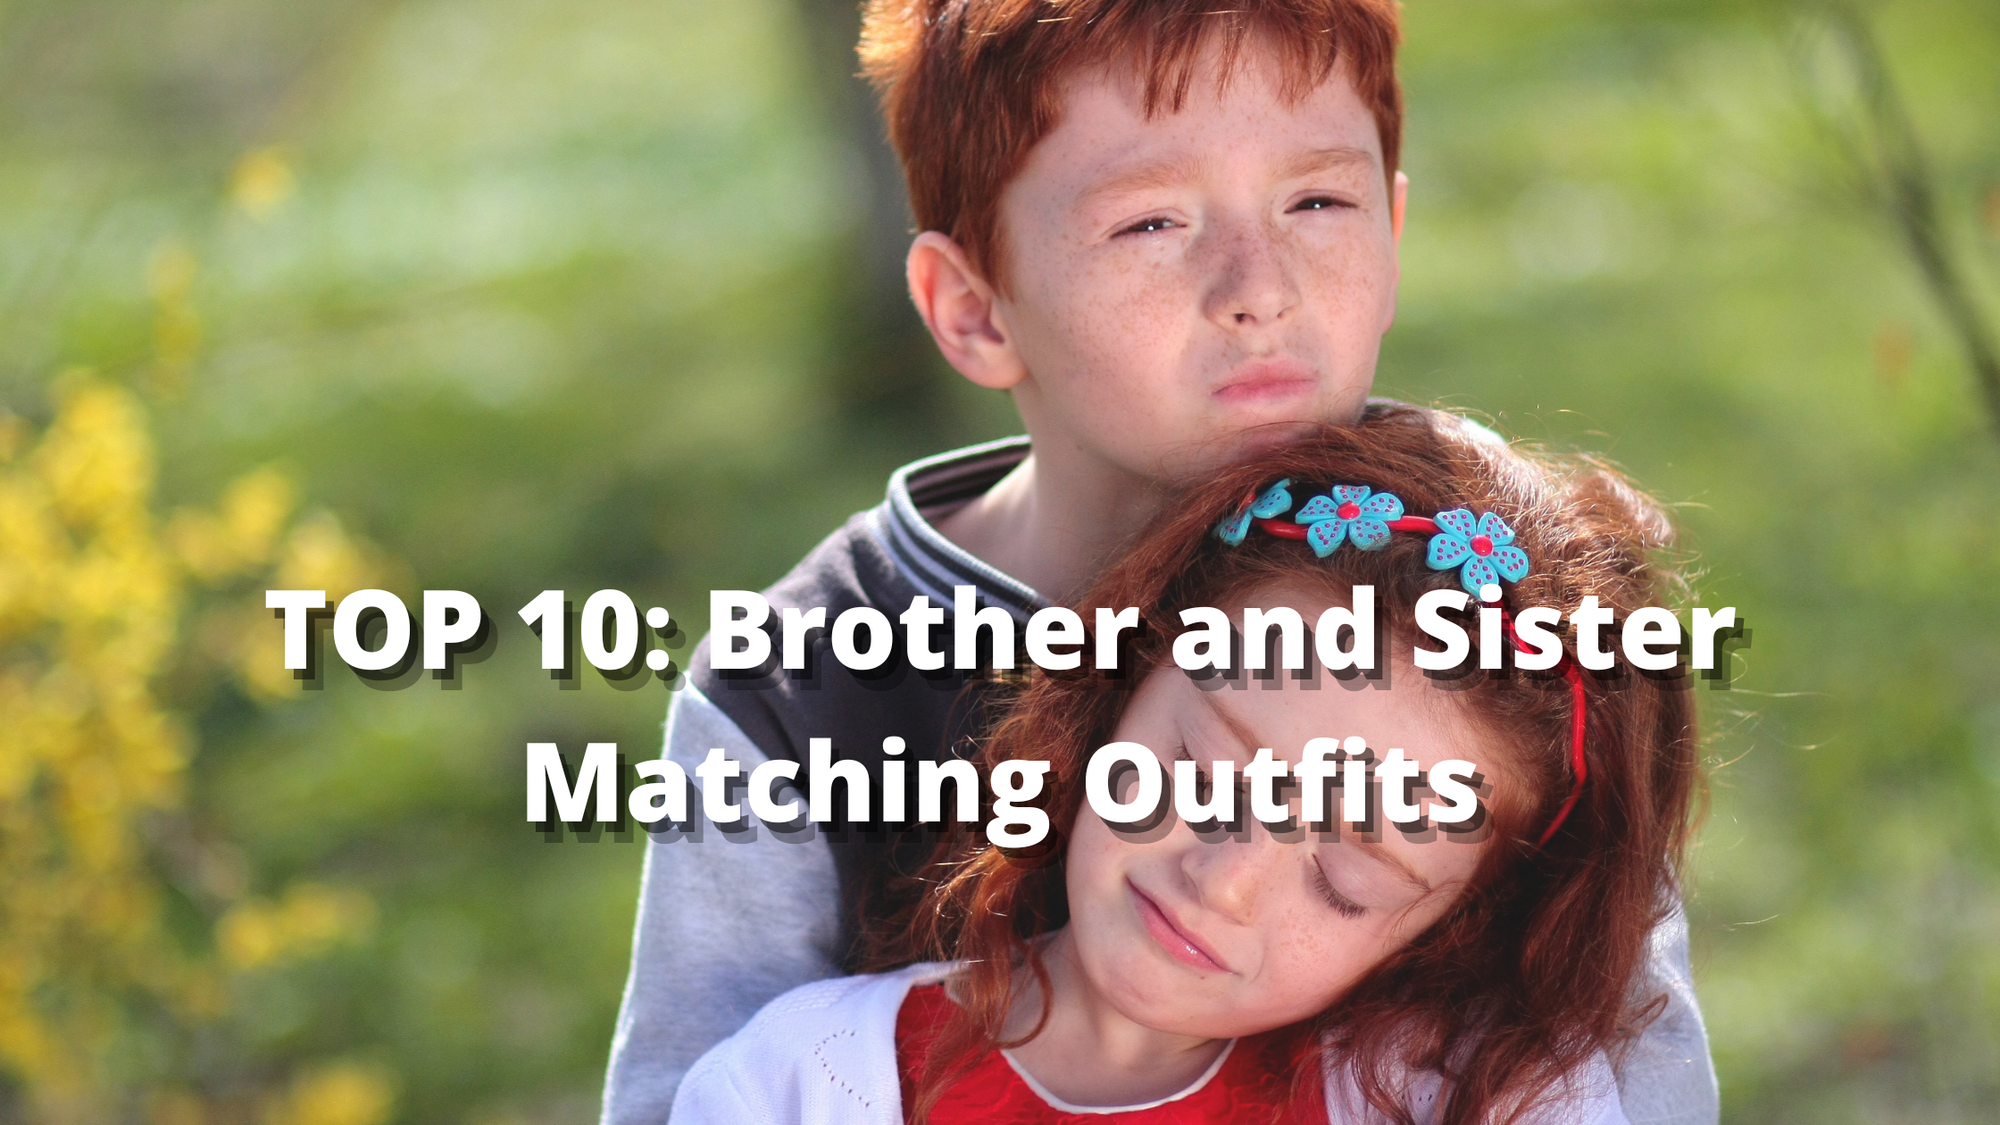 Top 10: Brother and Sister Matching Outfits